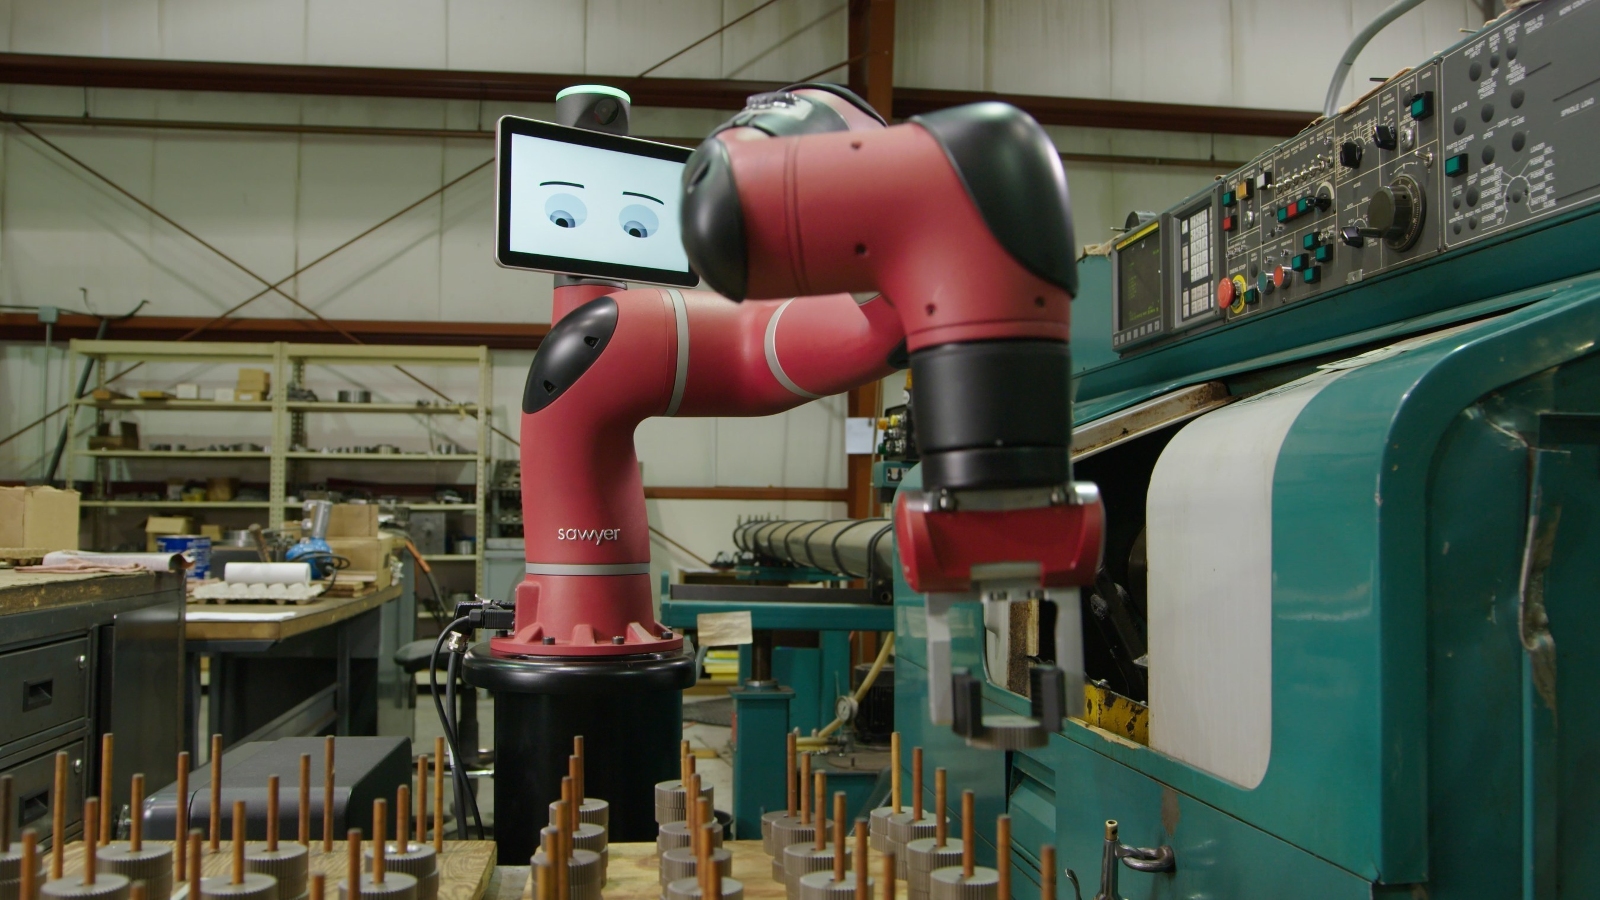 Fitzpatrick Manufacturing ‘increases efficiency’ with Rethink Robotics’ Sawyer collaborative robot